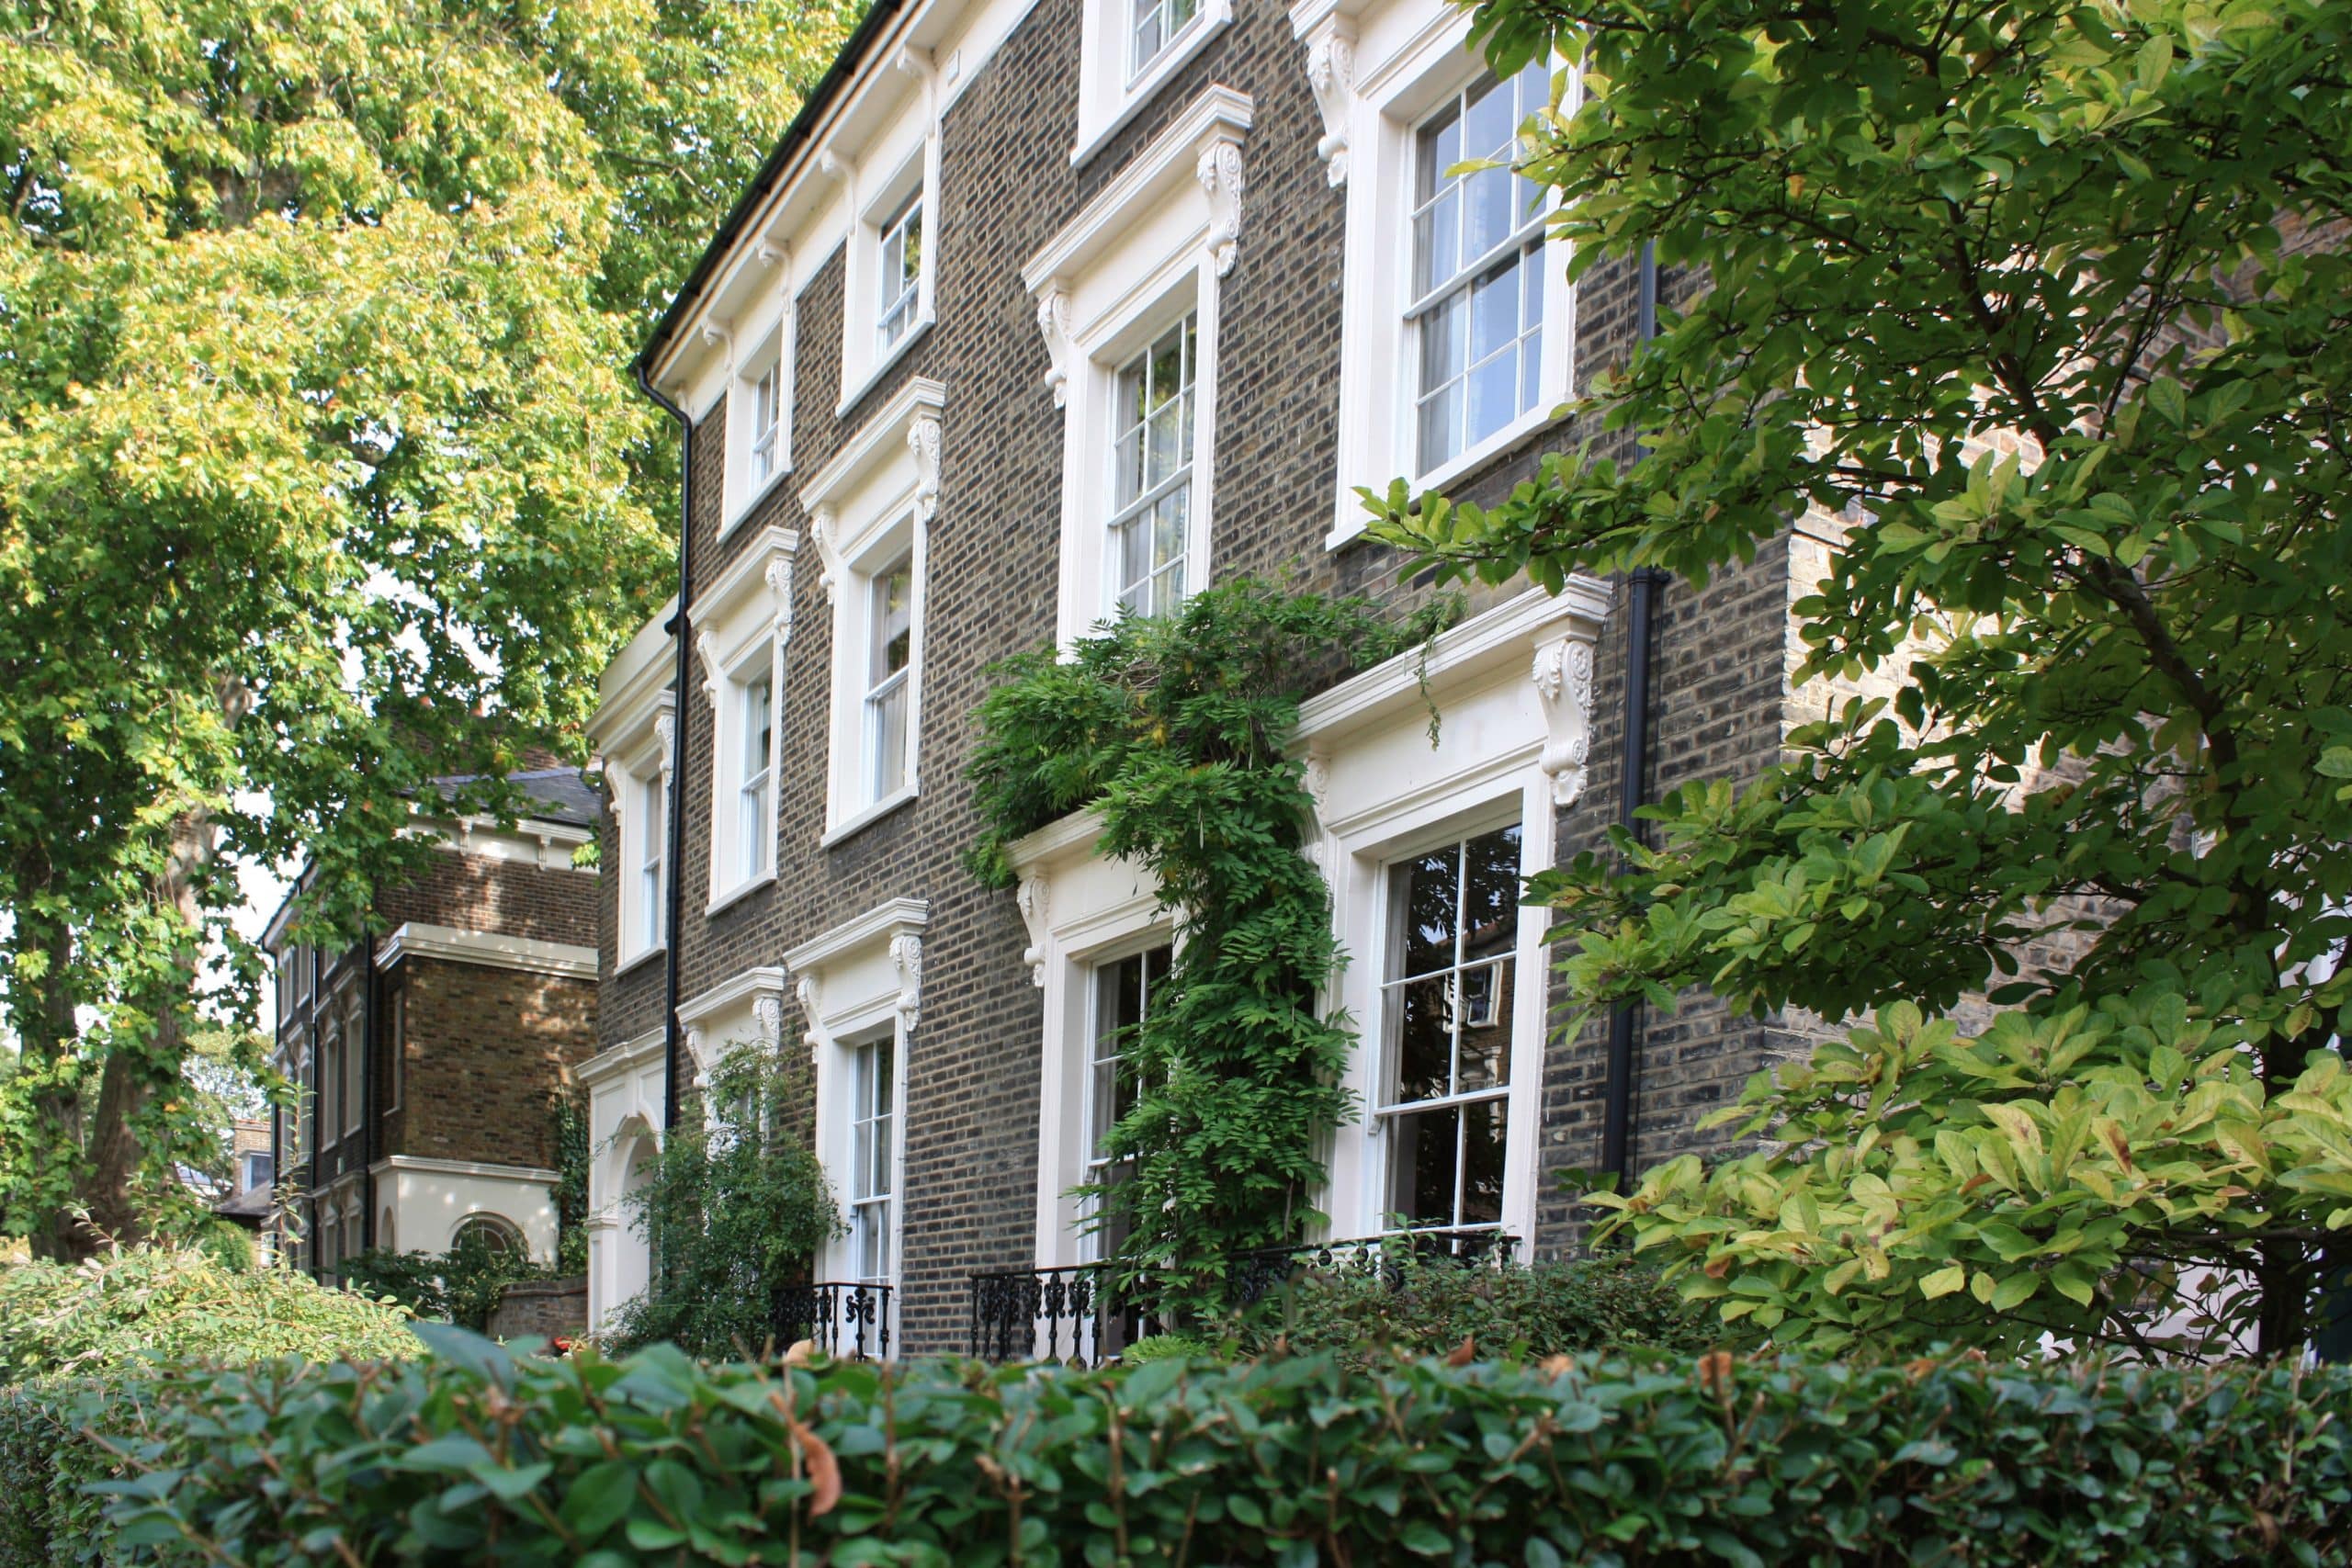 Sash windows are often crucial to a home's historic character